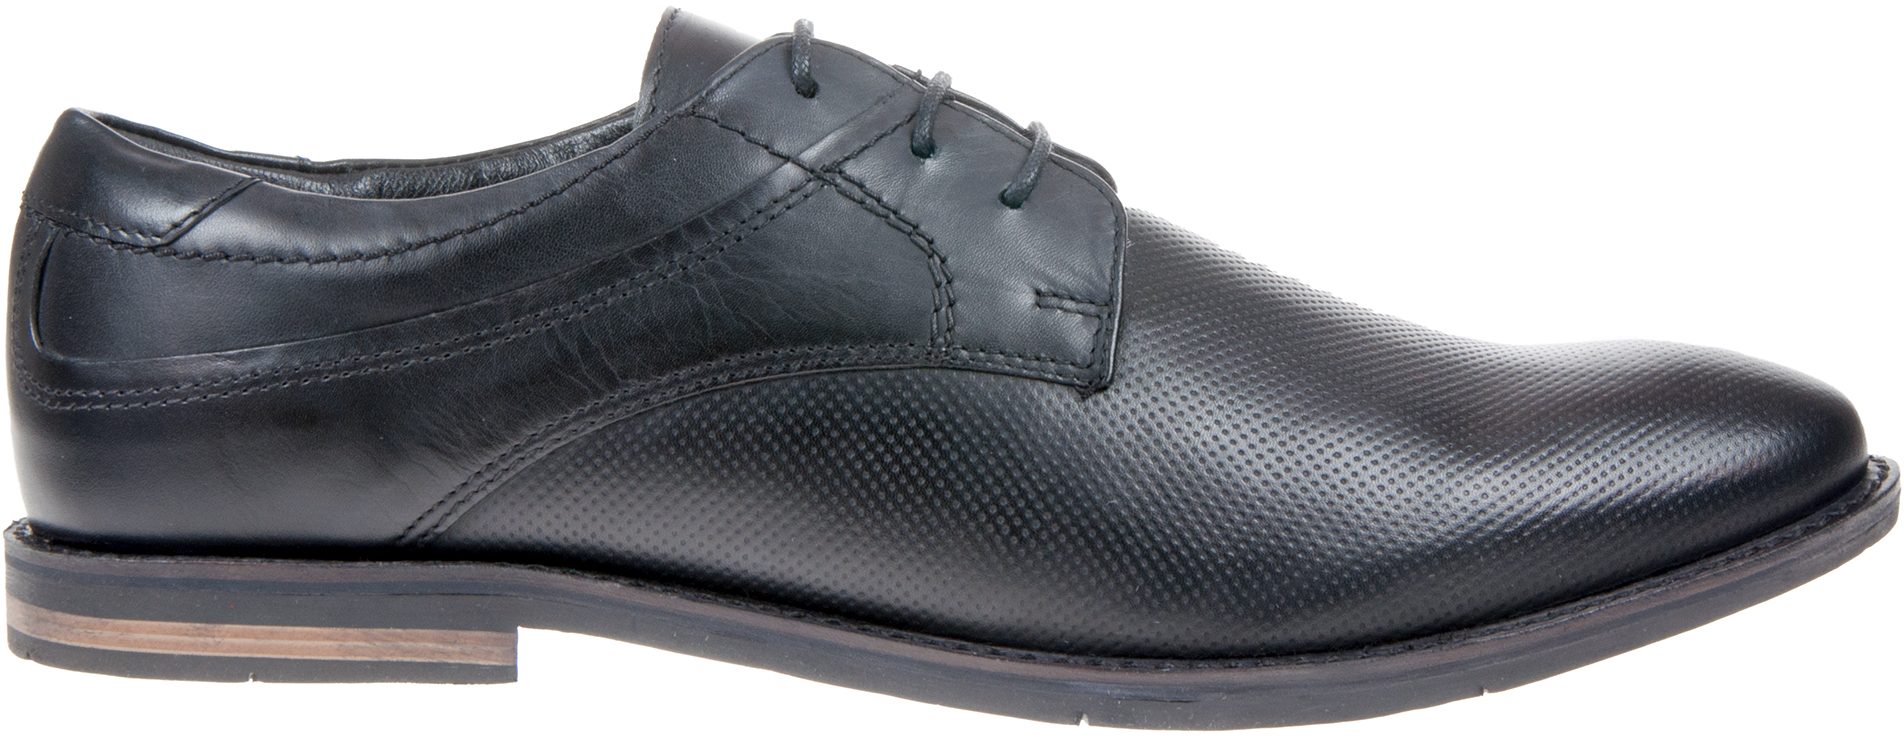 Adesso Connor 81 Black A4281 - Formal Shoes - Humphries Shoes